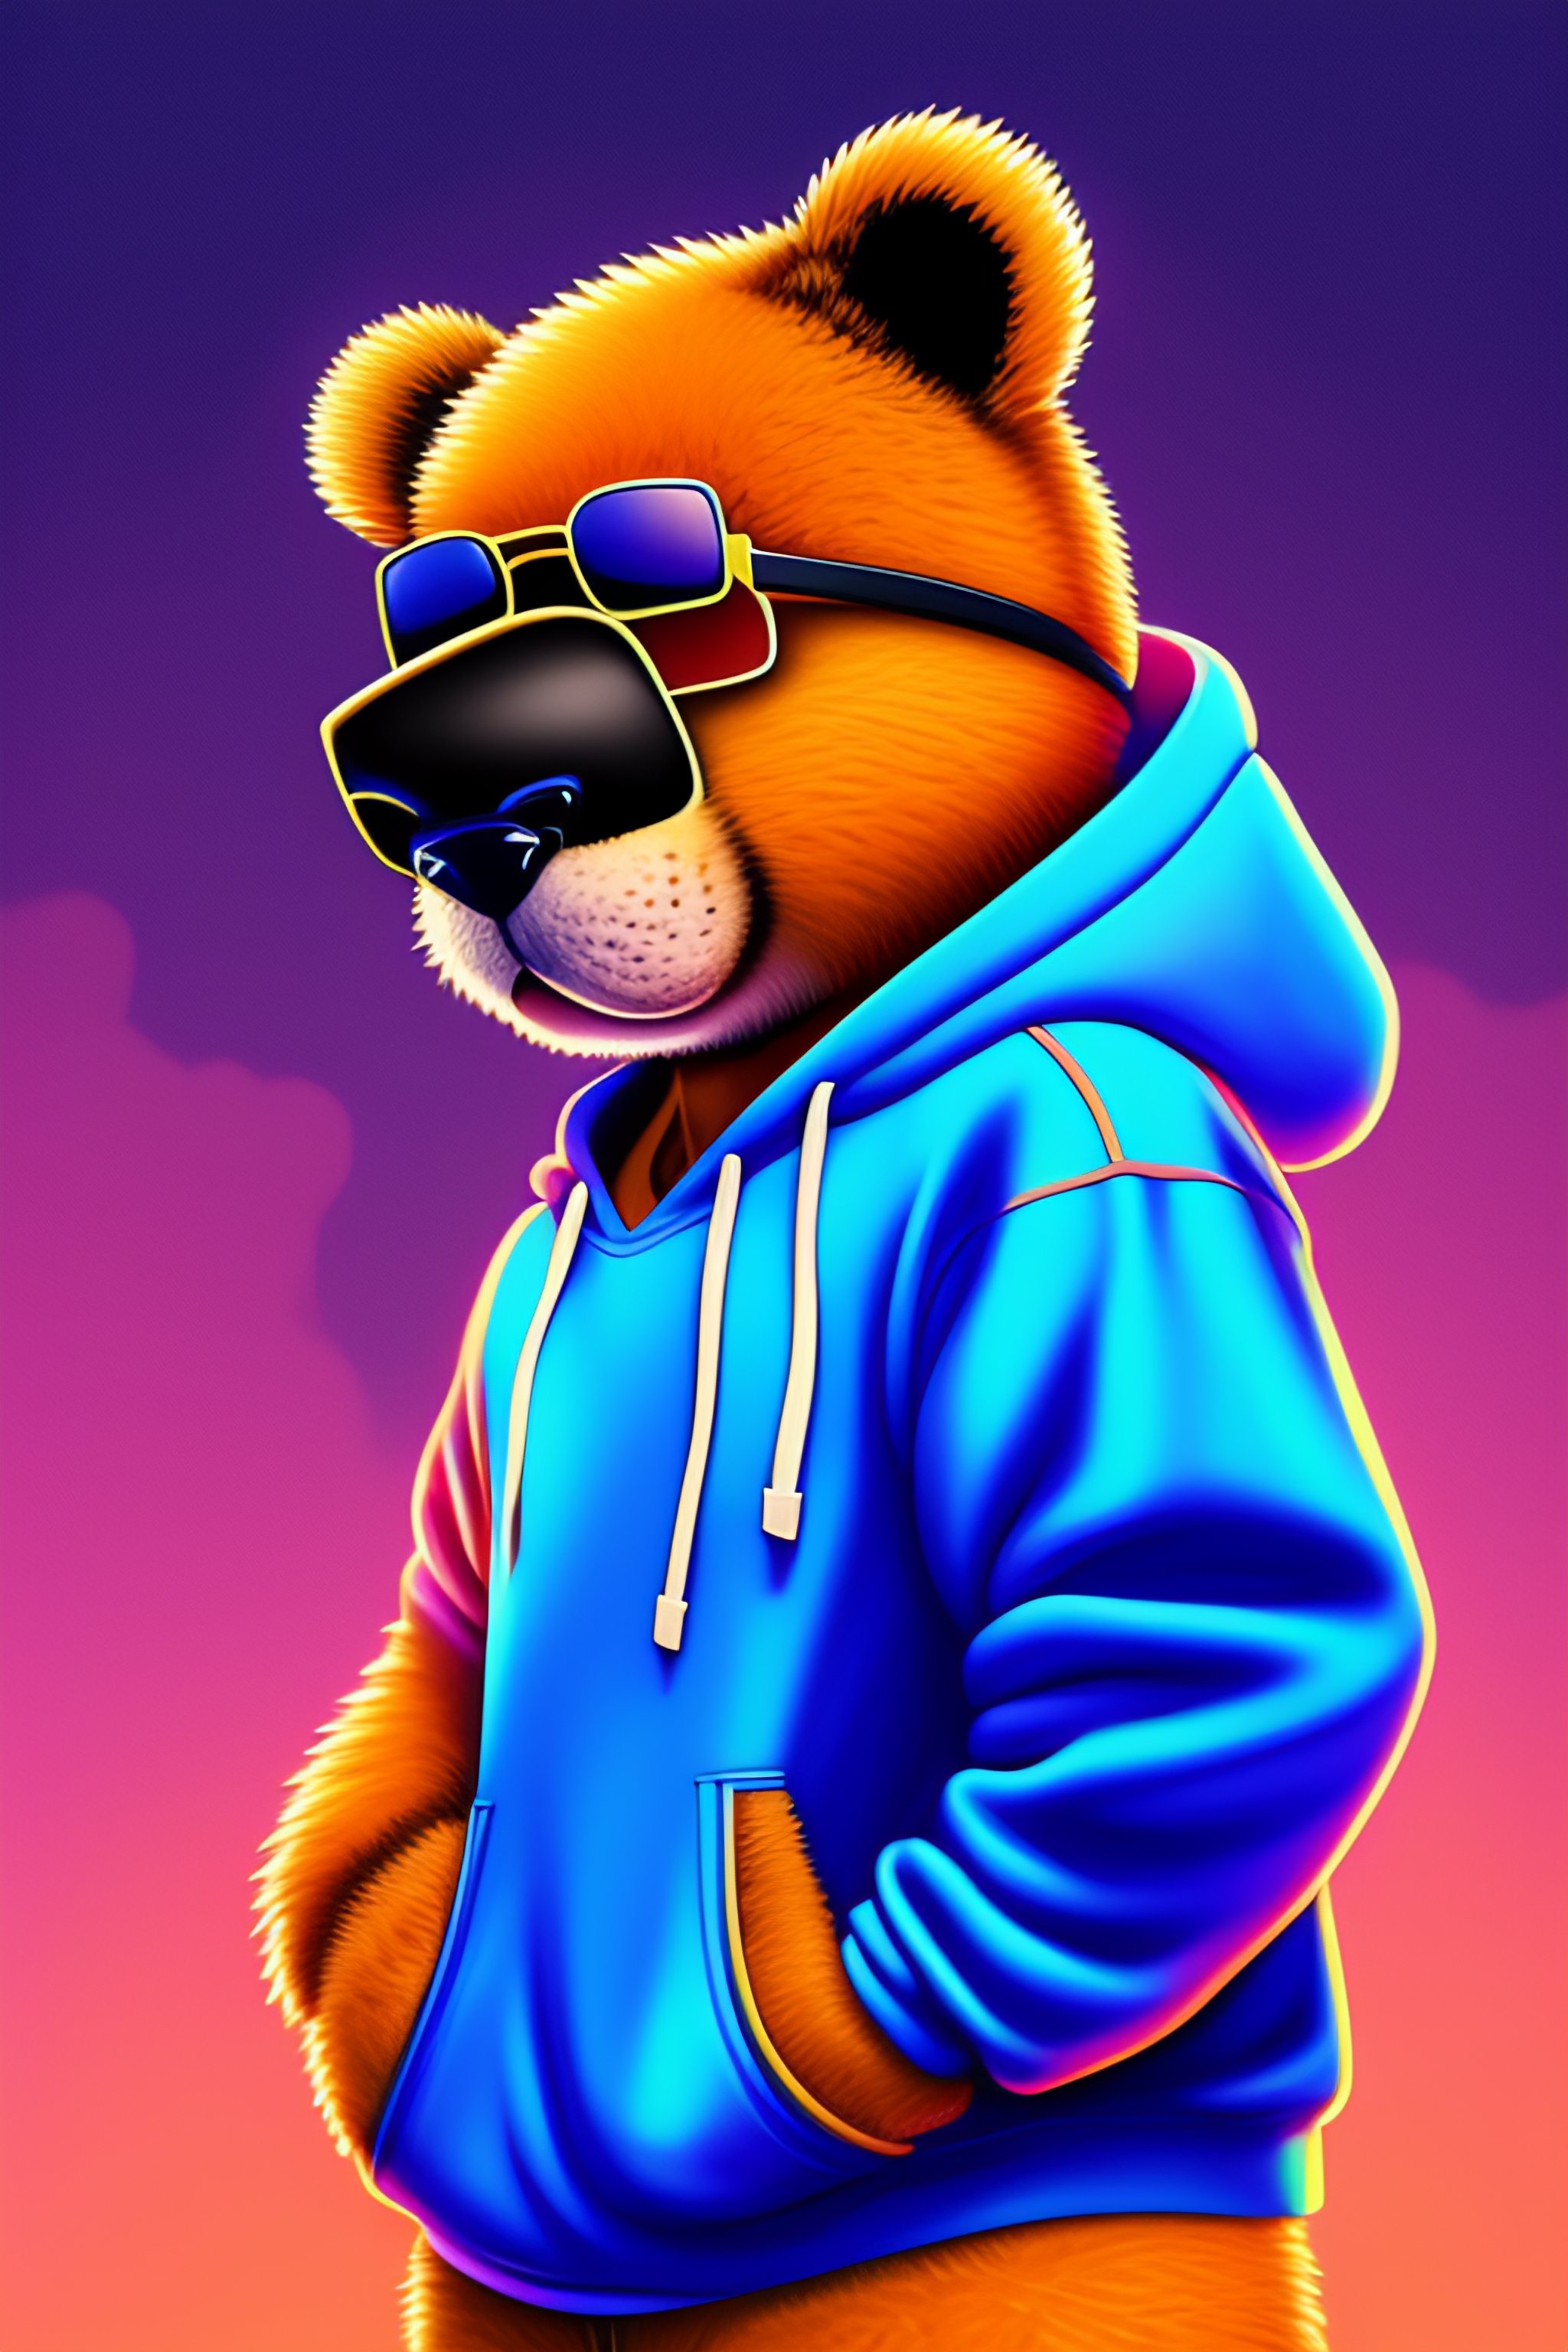 Lexica - Book cover style art of a teddy bear wearing a blue hoodie and ...